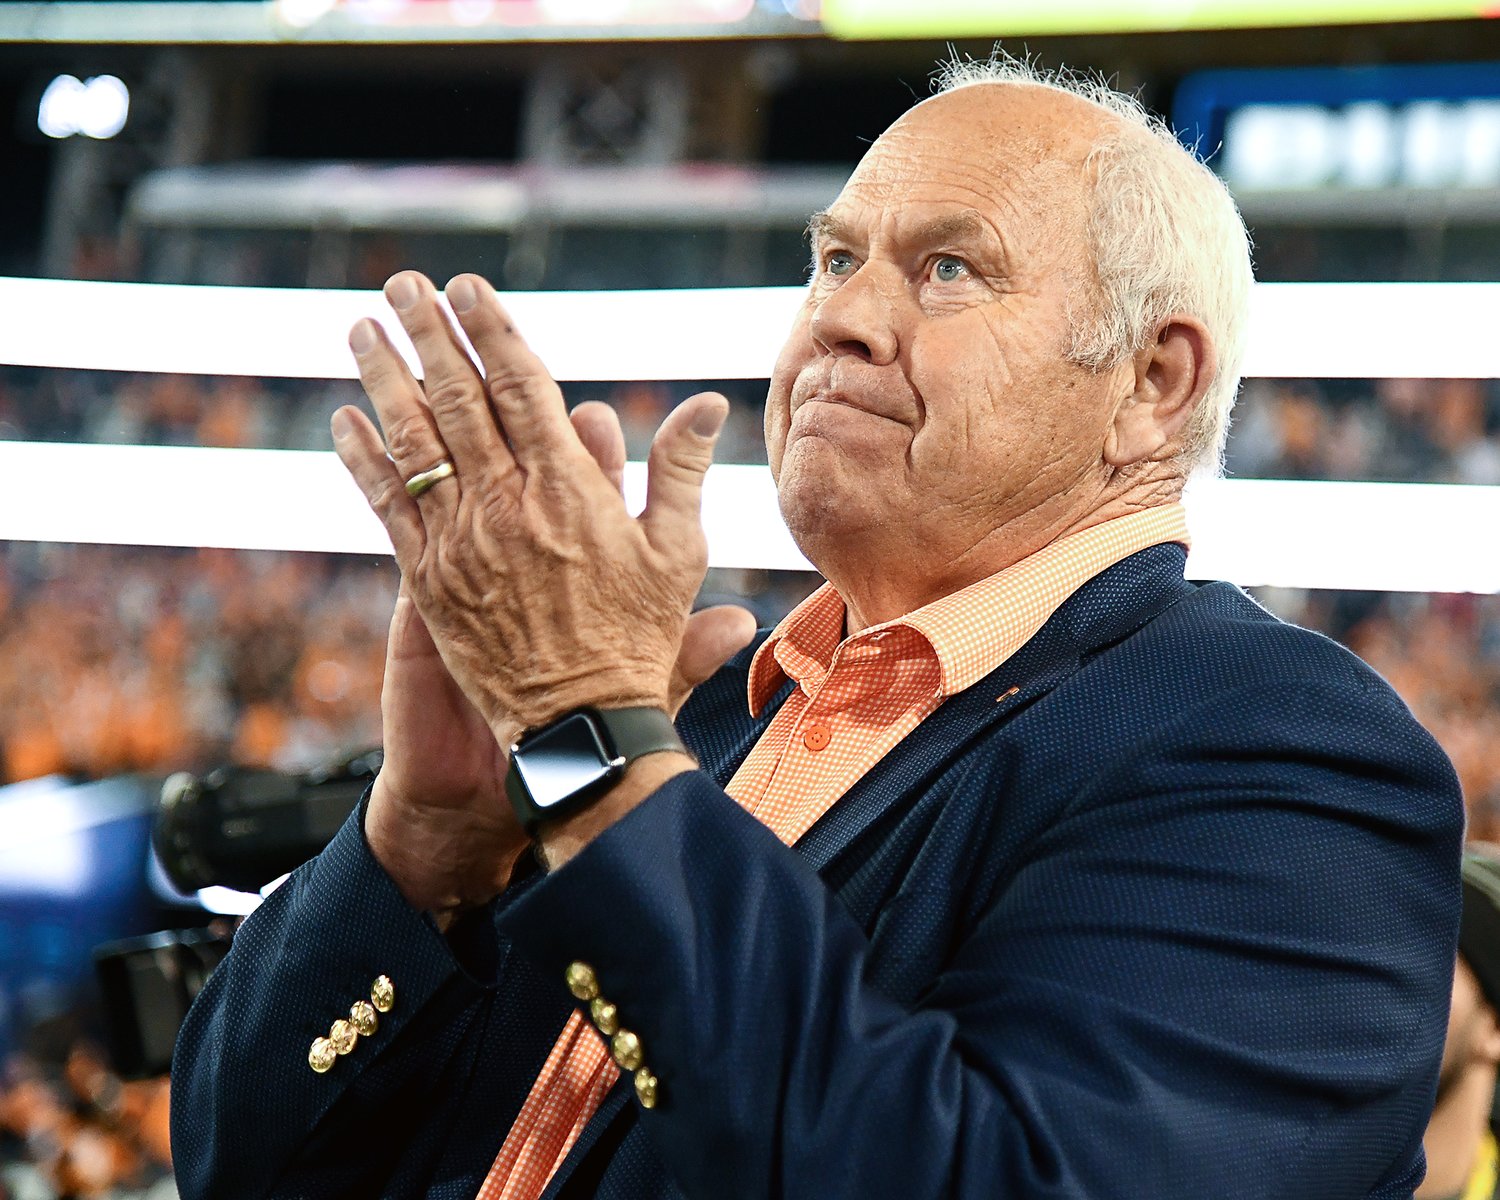 Tennessee Volunteers athletic direction, and former Vols head coach, Phillip Fulmer looks on and applauds as the clock winds down and the Volunteers win the Gator Bowl, defeating the Indiana Hoosiers, Thursday, January 2, 2020, at TIAA Bank Field in Jacksonville, Fla.